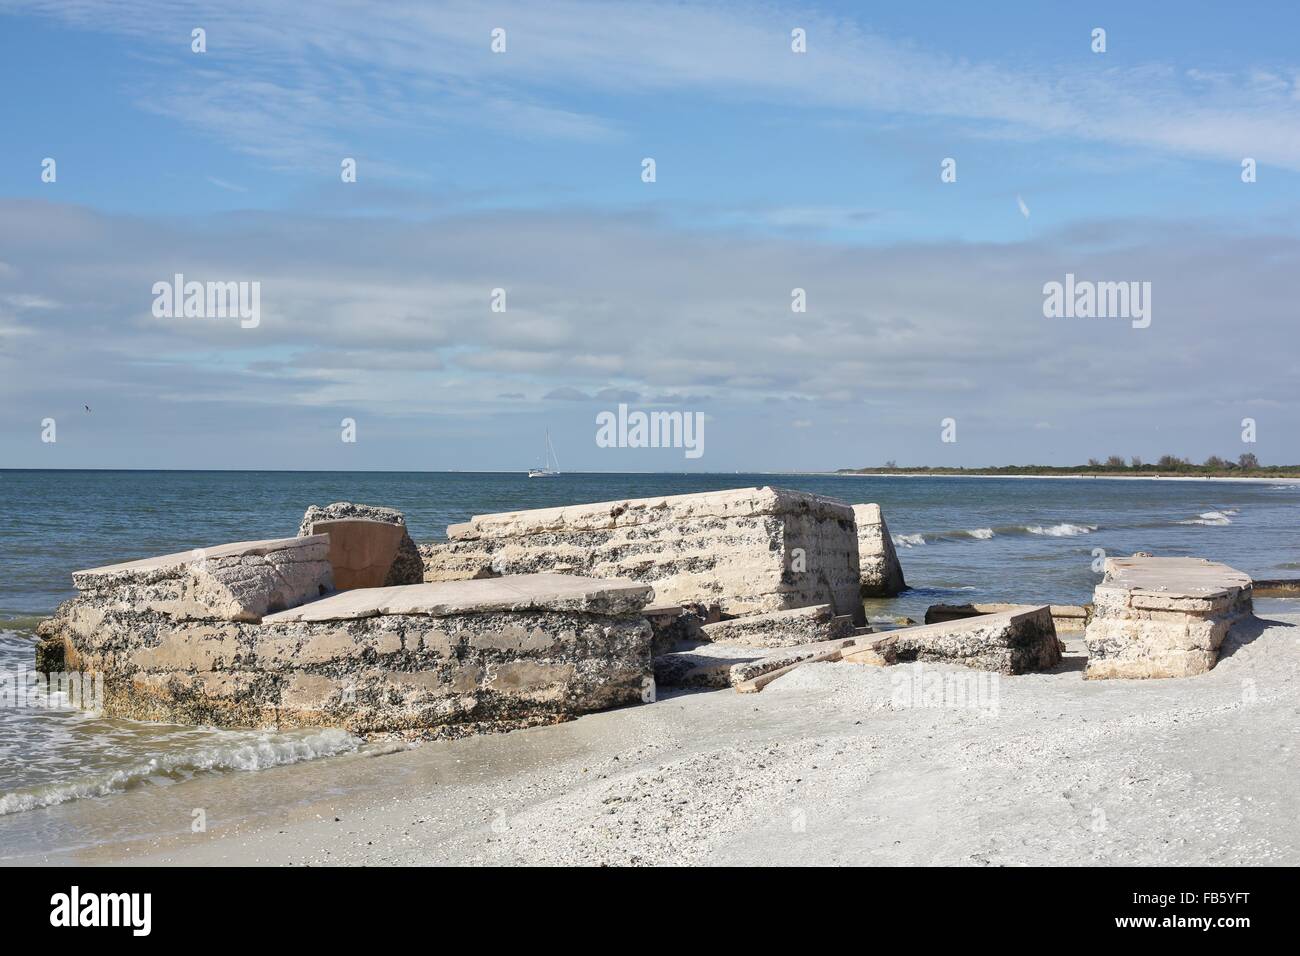 Ruins crumbling into the ocean at Fort Desoto in St. Petersburg, Florida. Stock Photo